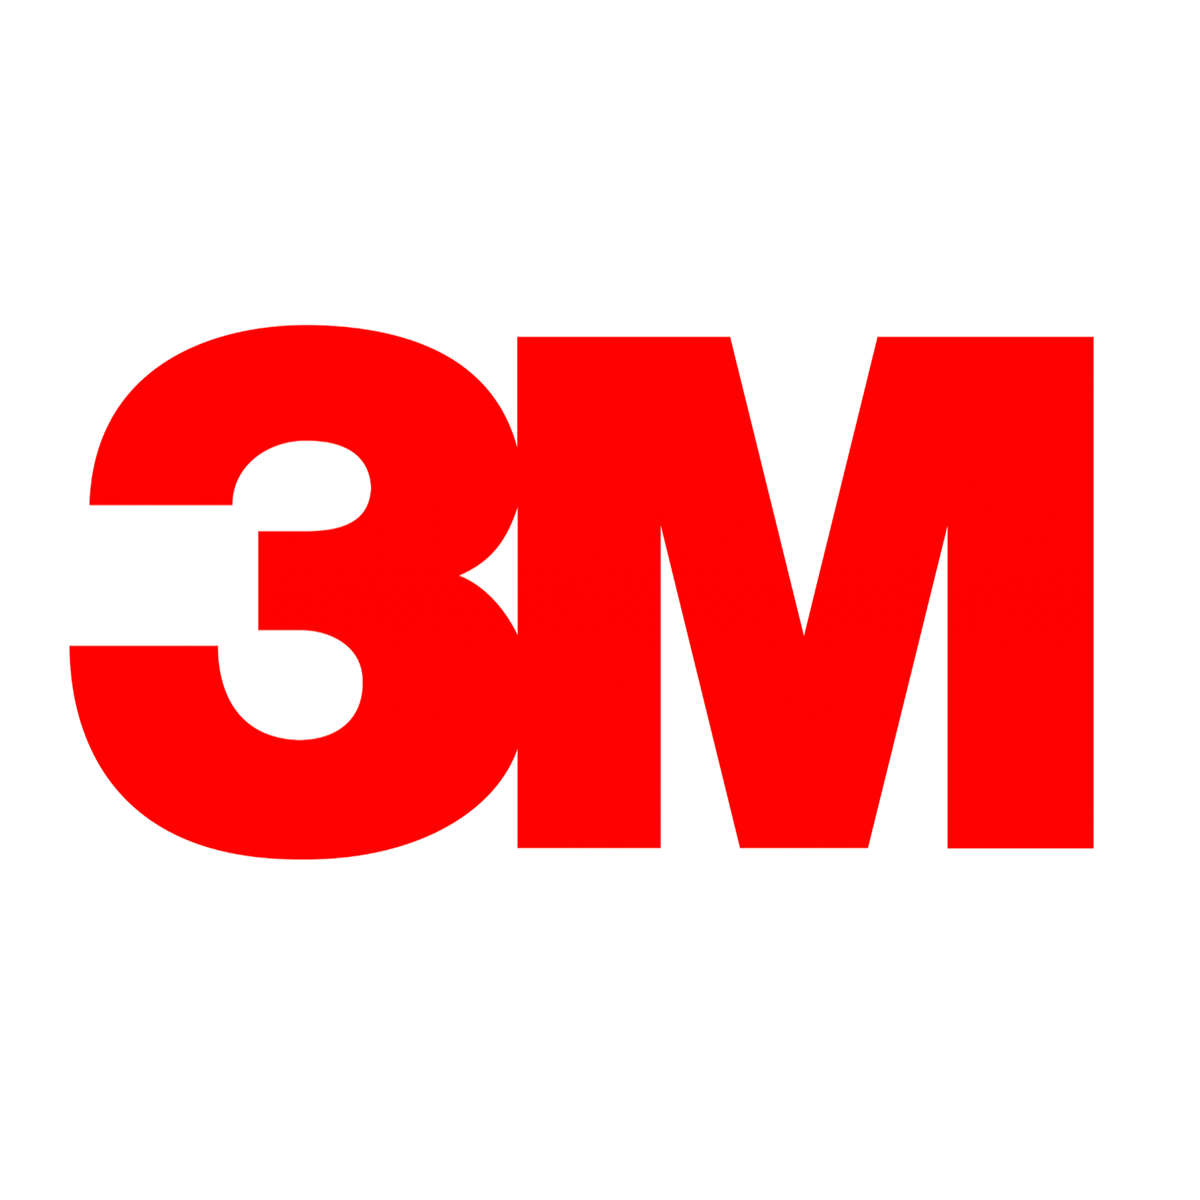 Where to Buy 3M Products